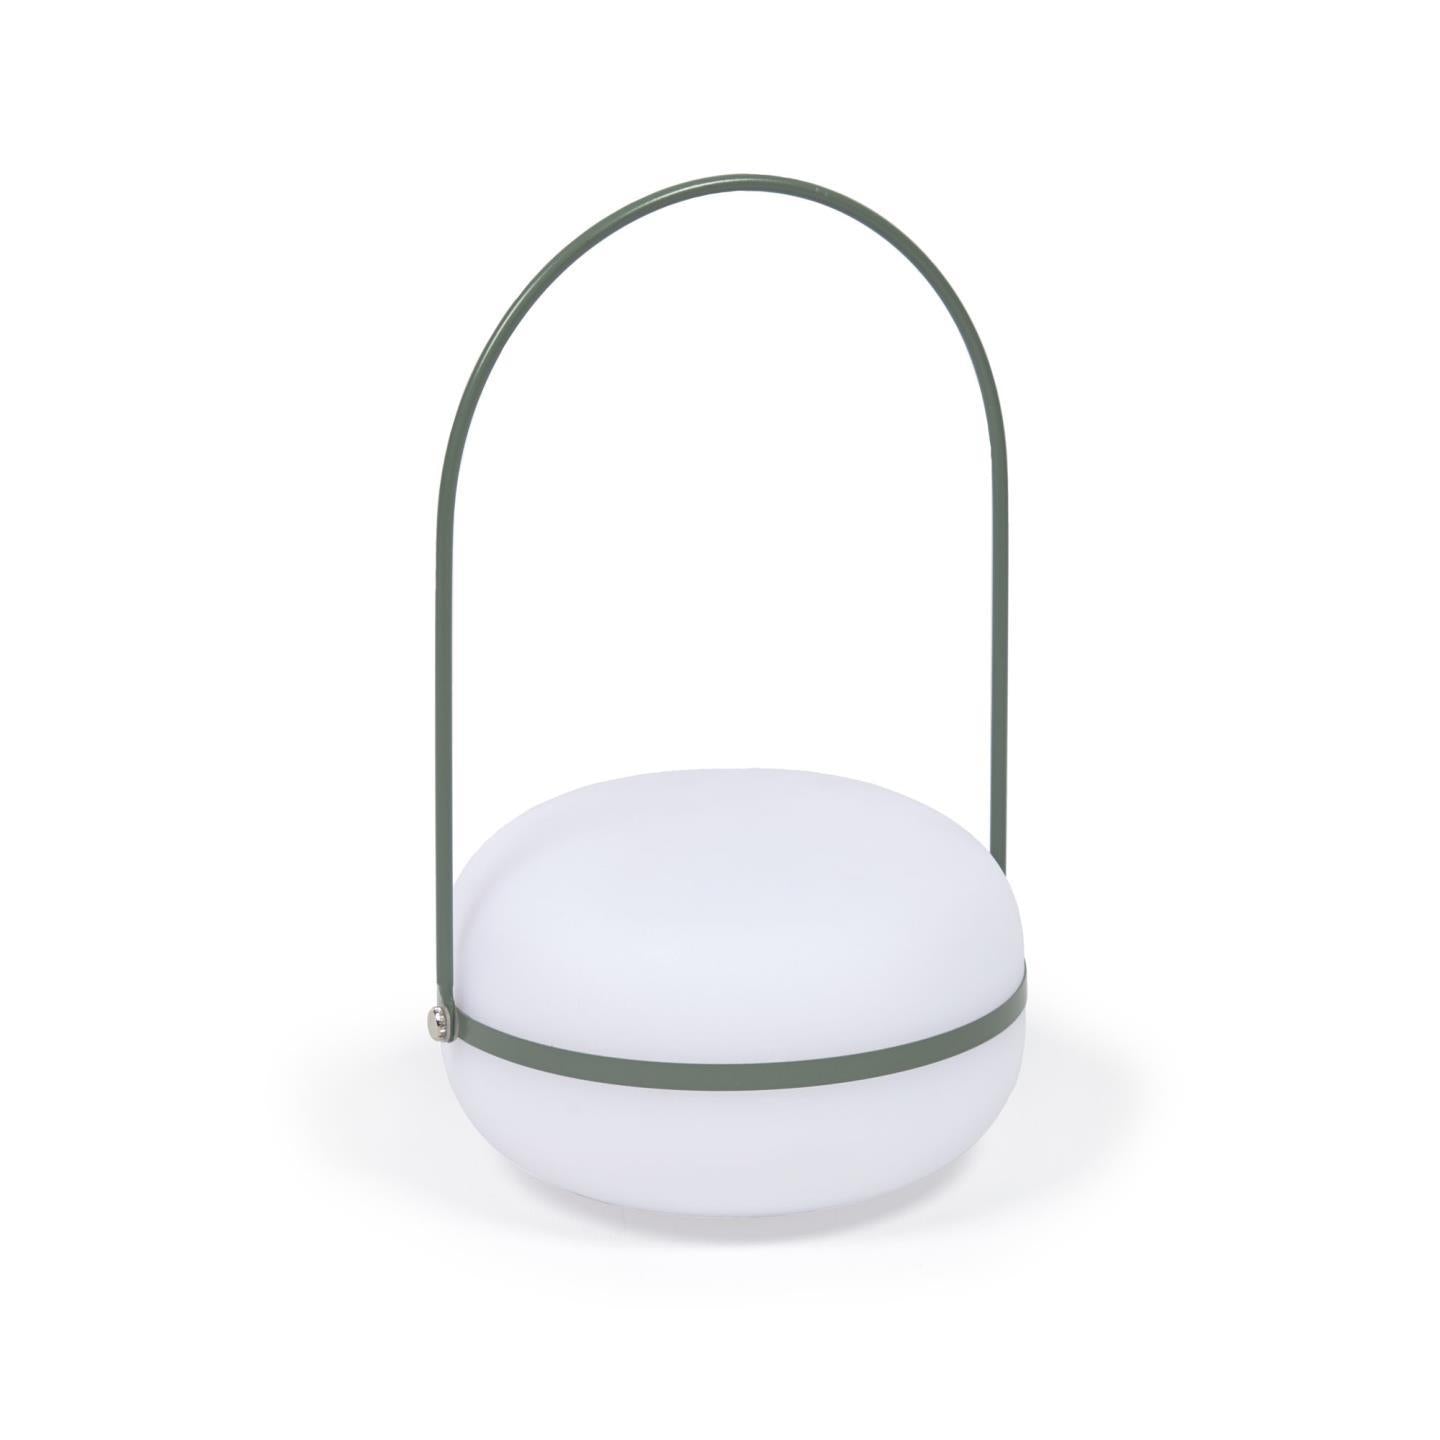 Tea table lamp in polythene and metal with green finish